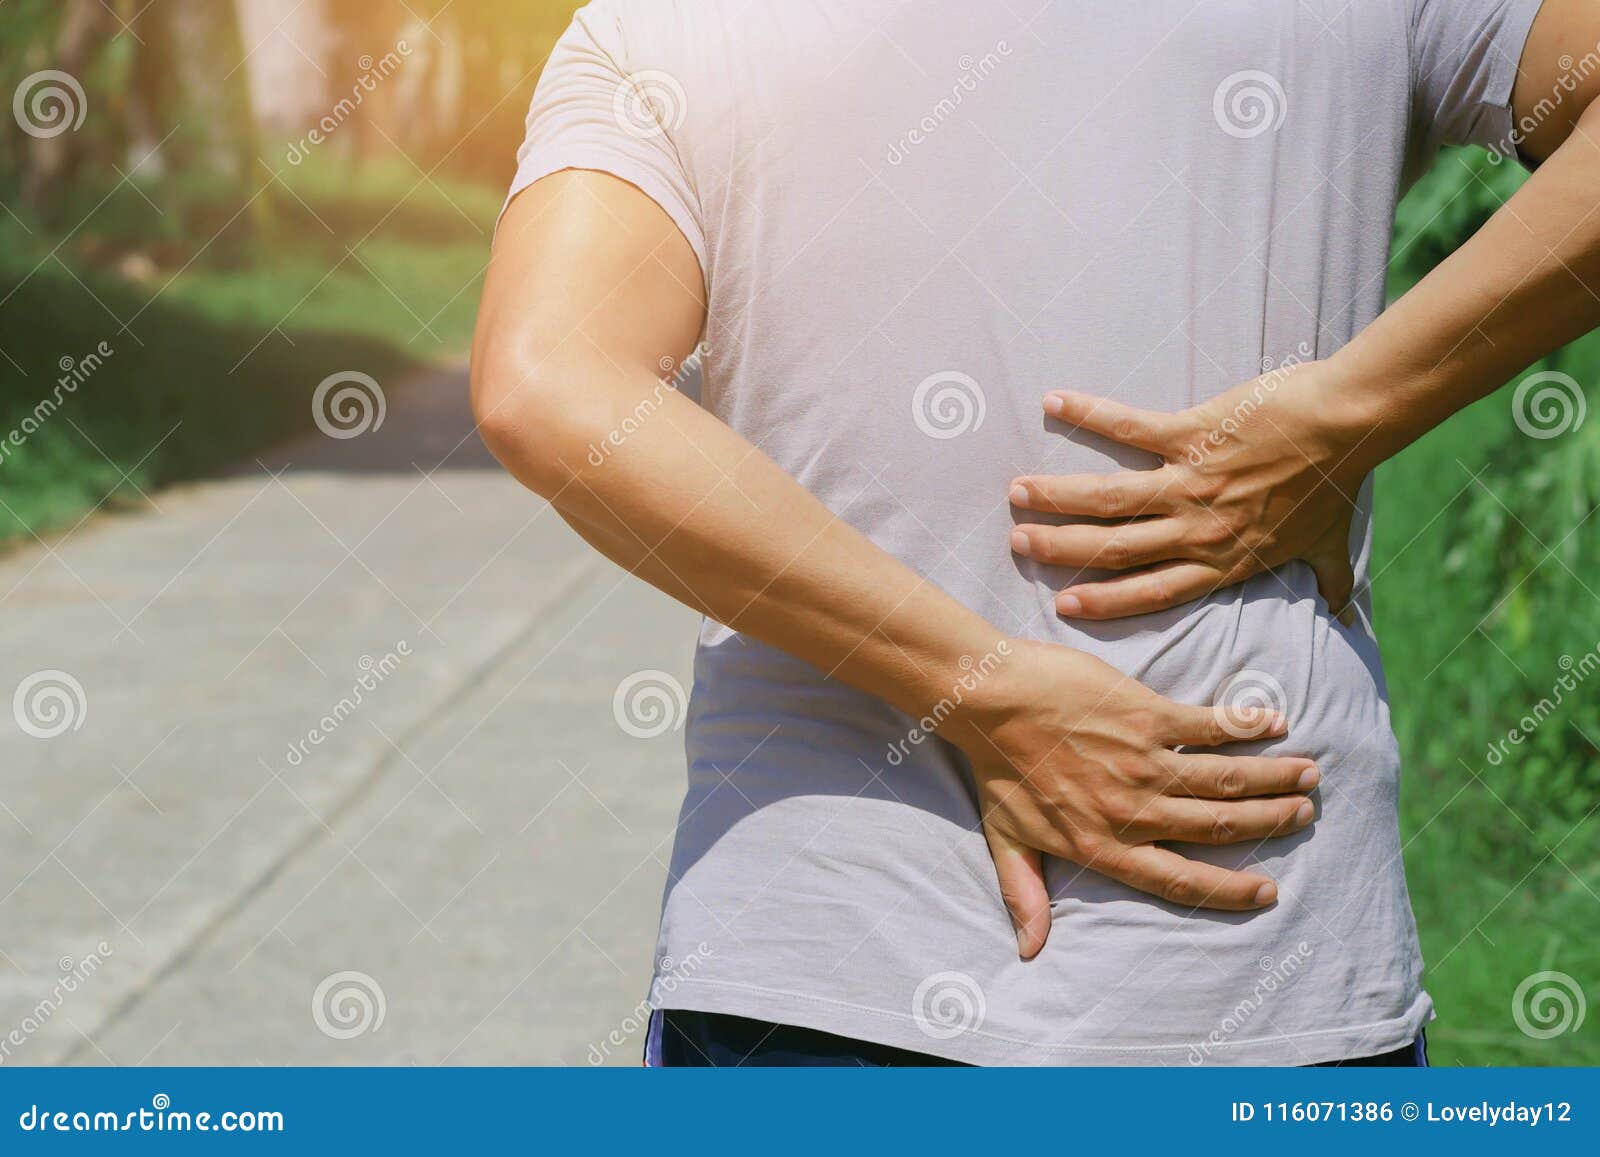 man runing with back pain